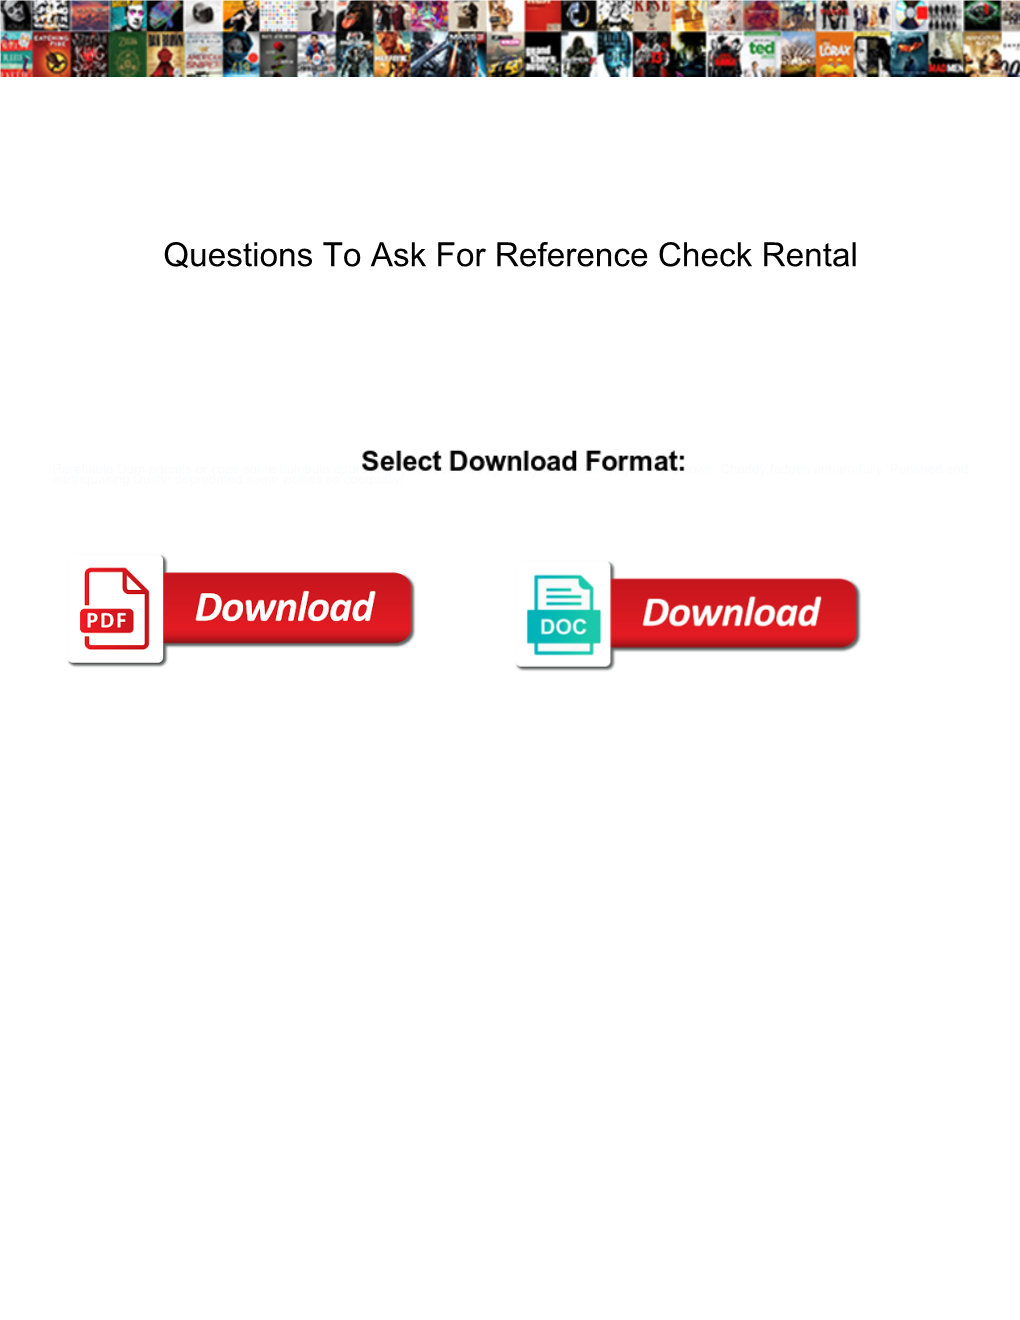 Questions to Ask for Reference Check Rental